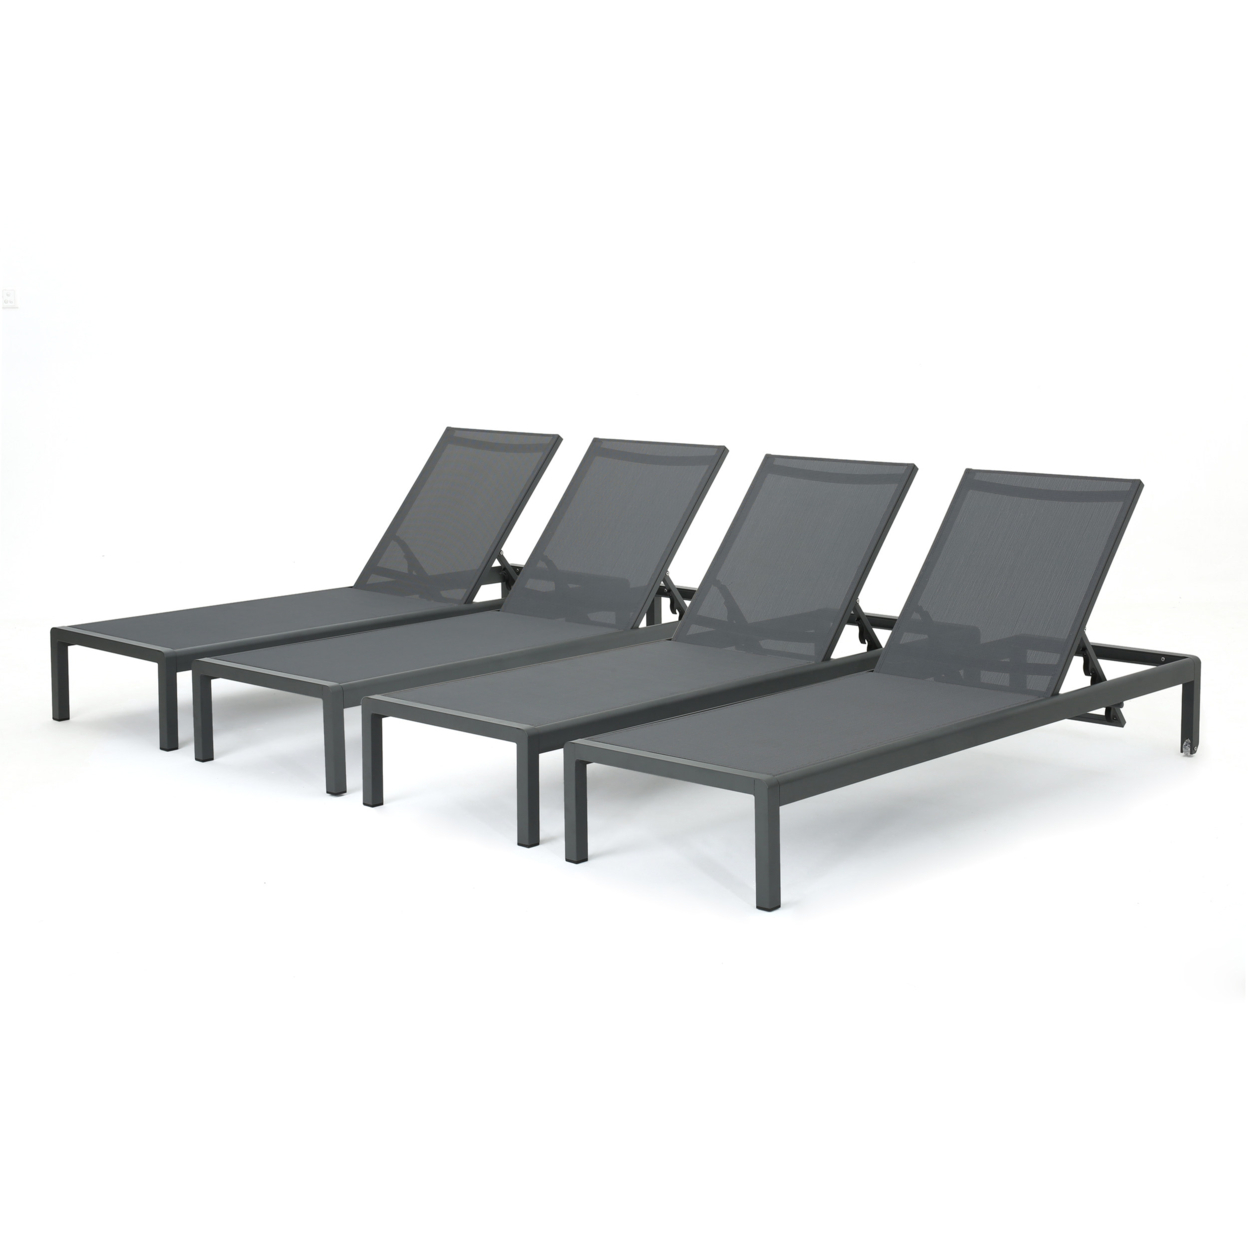 Coral Bay Outdoor Aluminum Chaise Lounge With Mesh Seat - Set Of 4